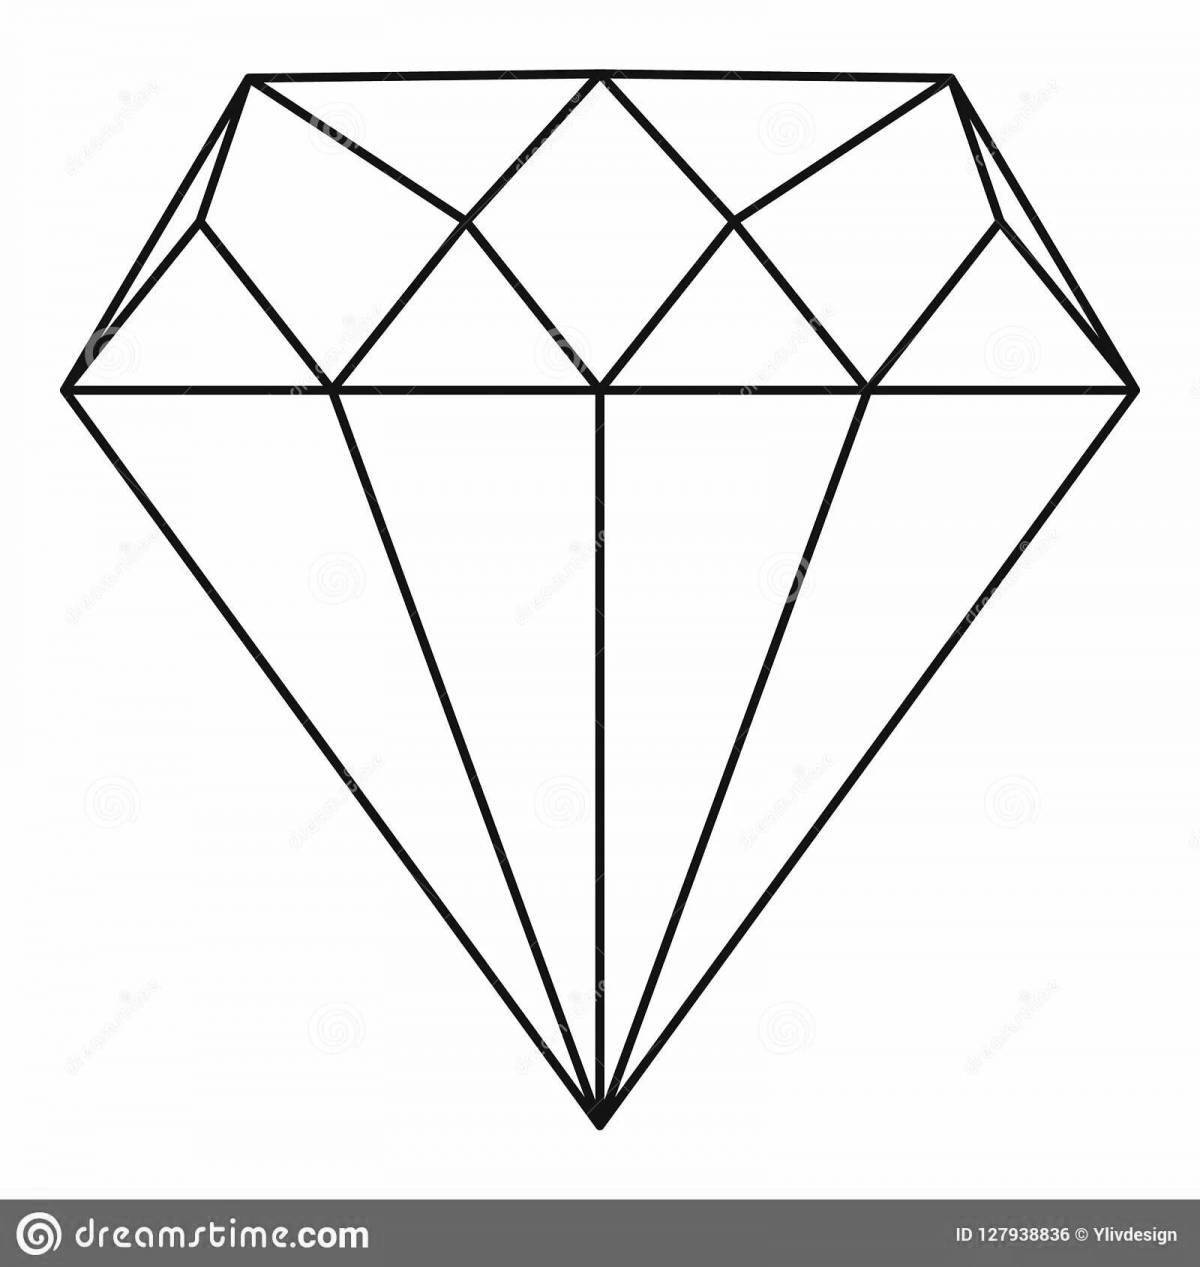 Shining diamond coloring book for kids